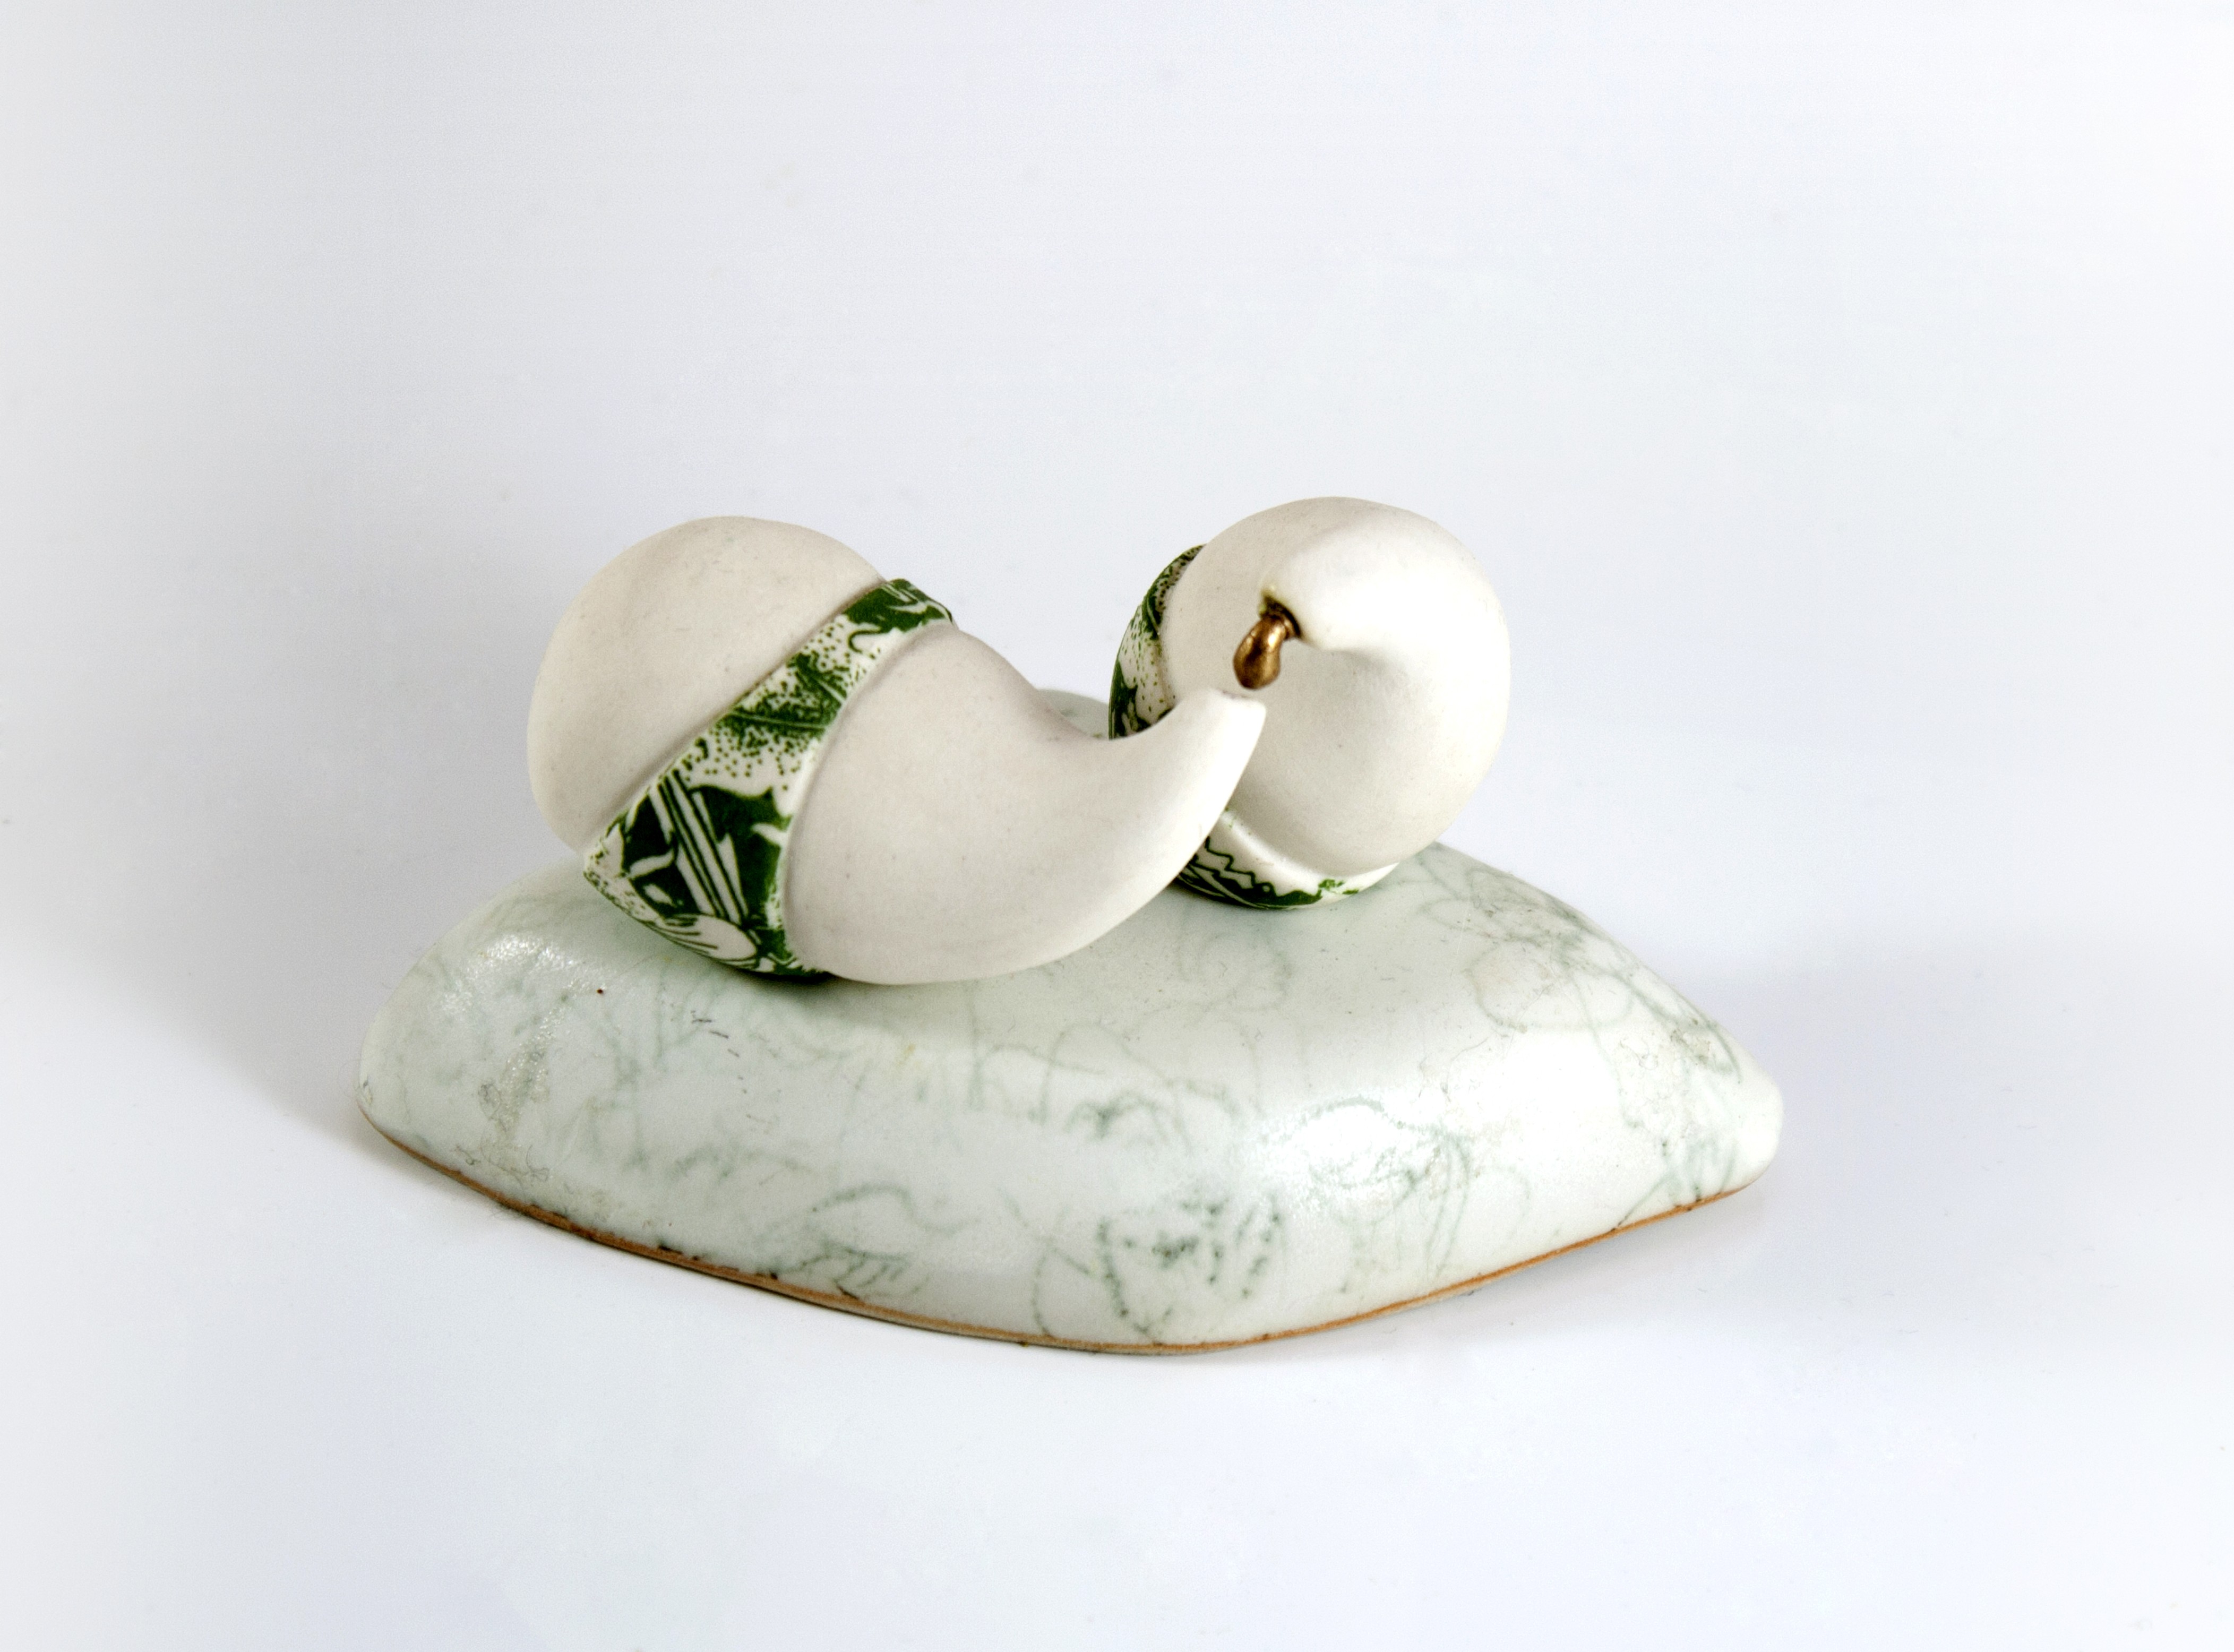 "Enticement" by Amy Chase. Porcelain, underglaze, luster.